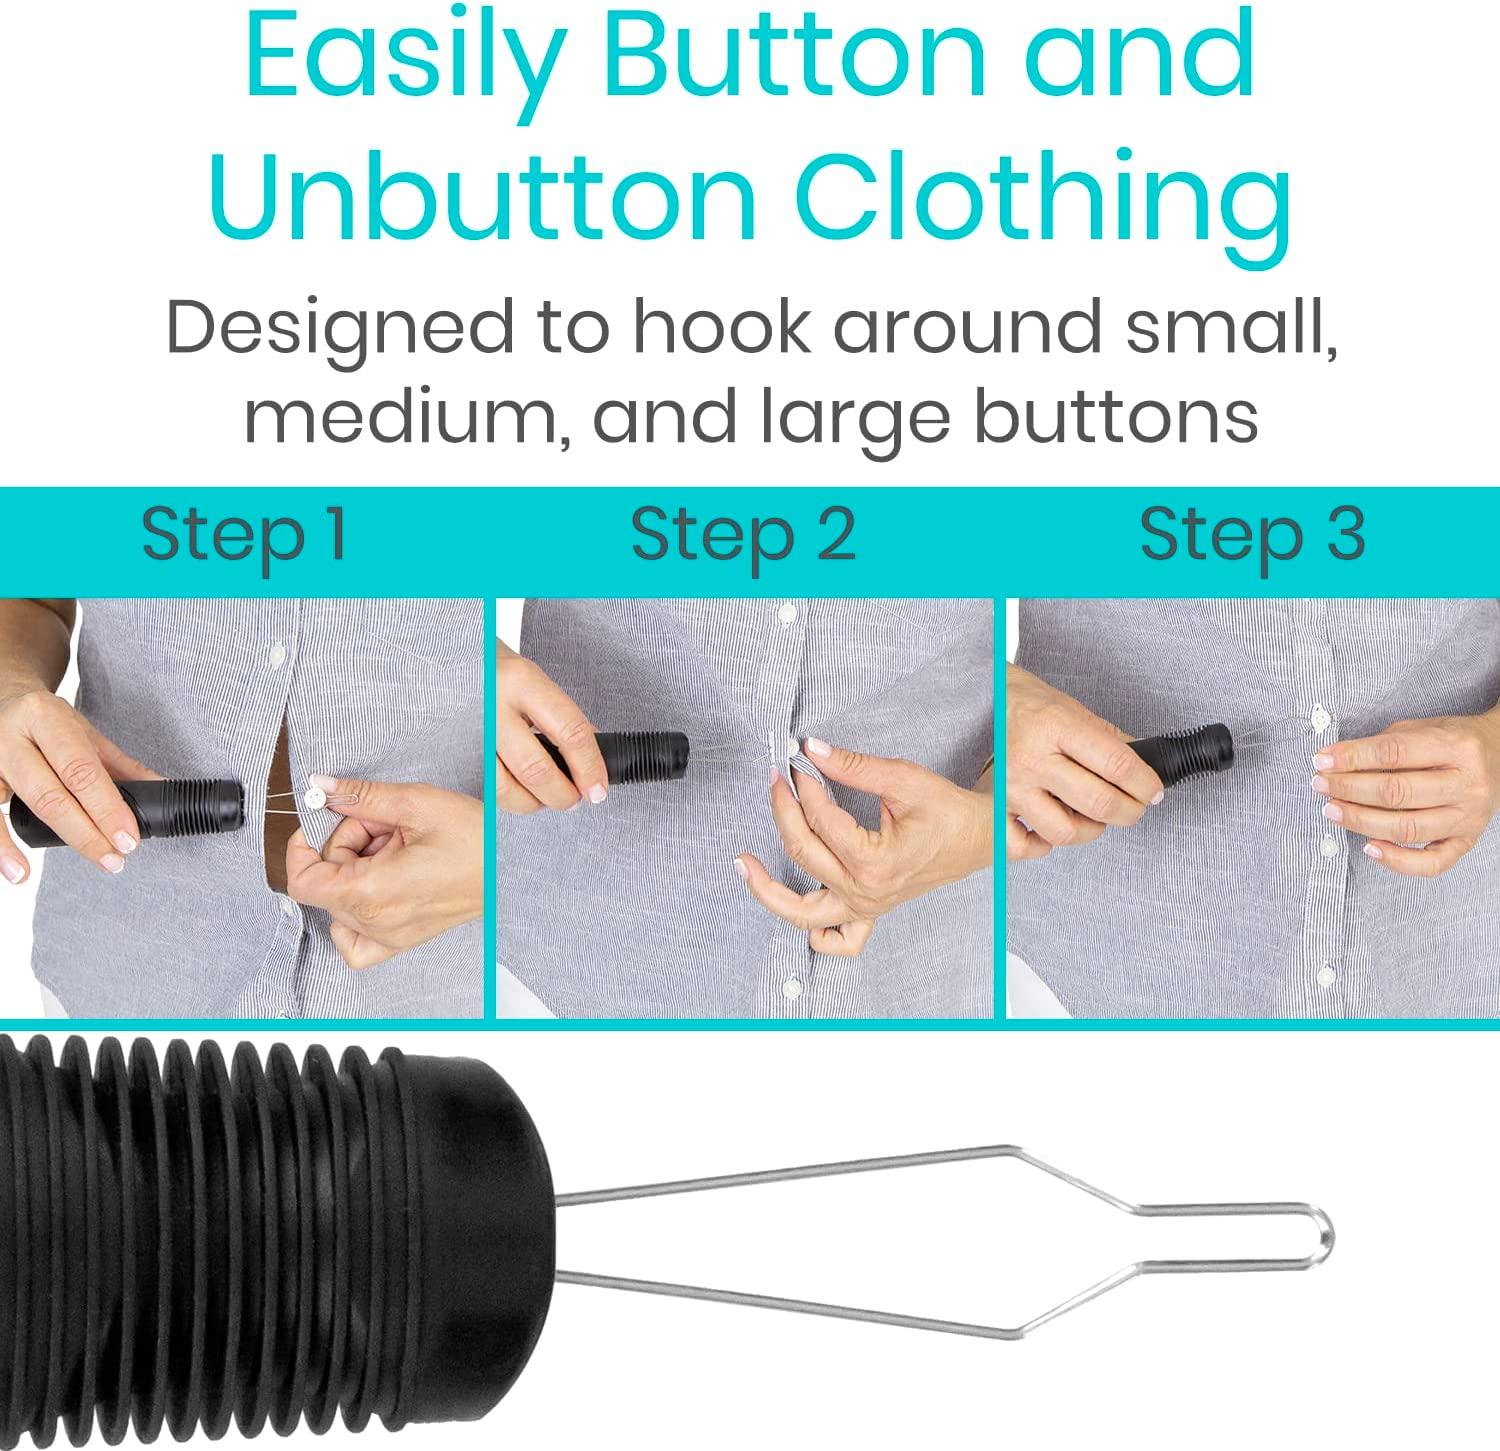 Red Pocket Dresser :: Button hook, zipper pull, and button aid